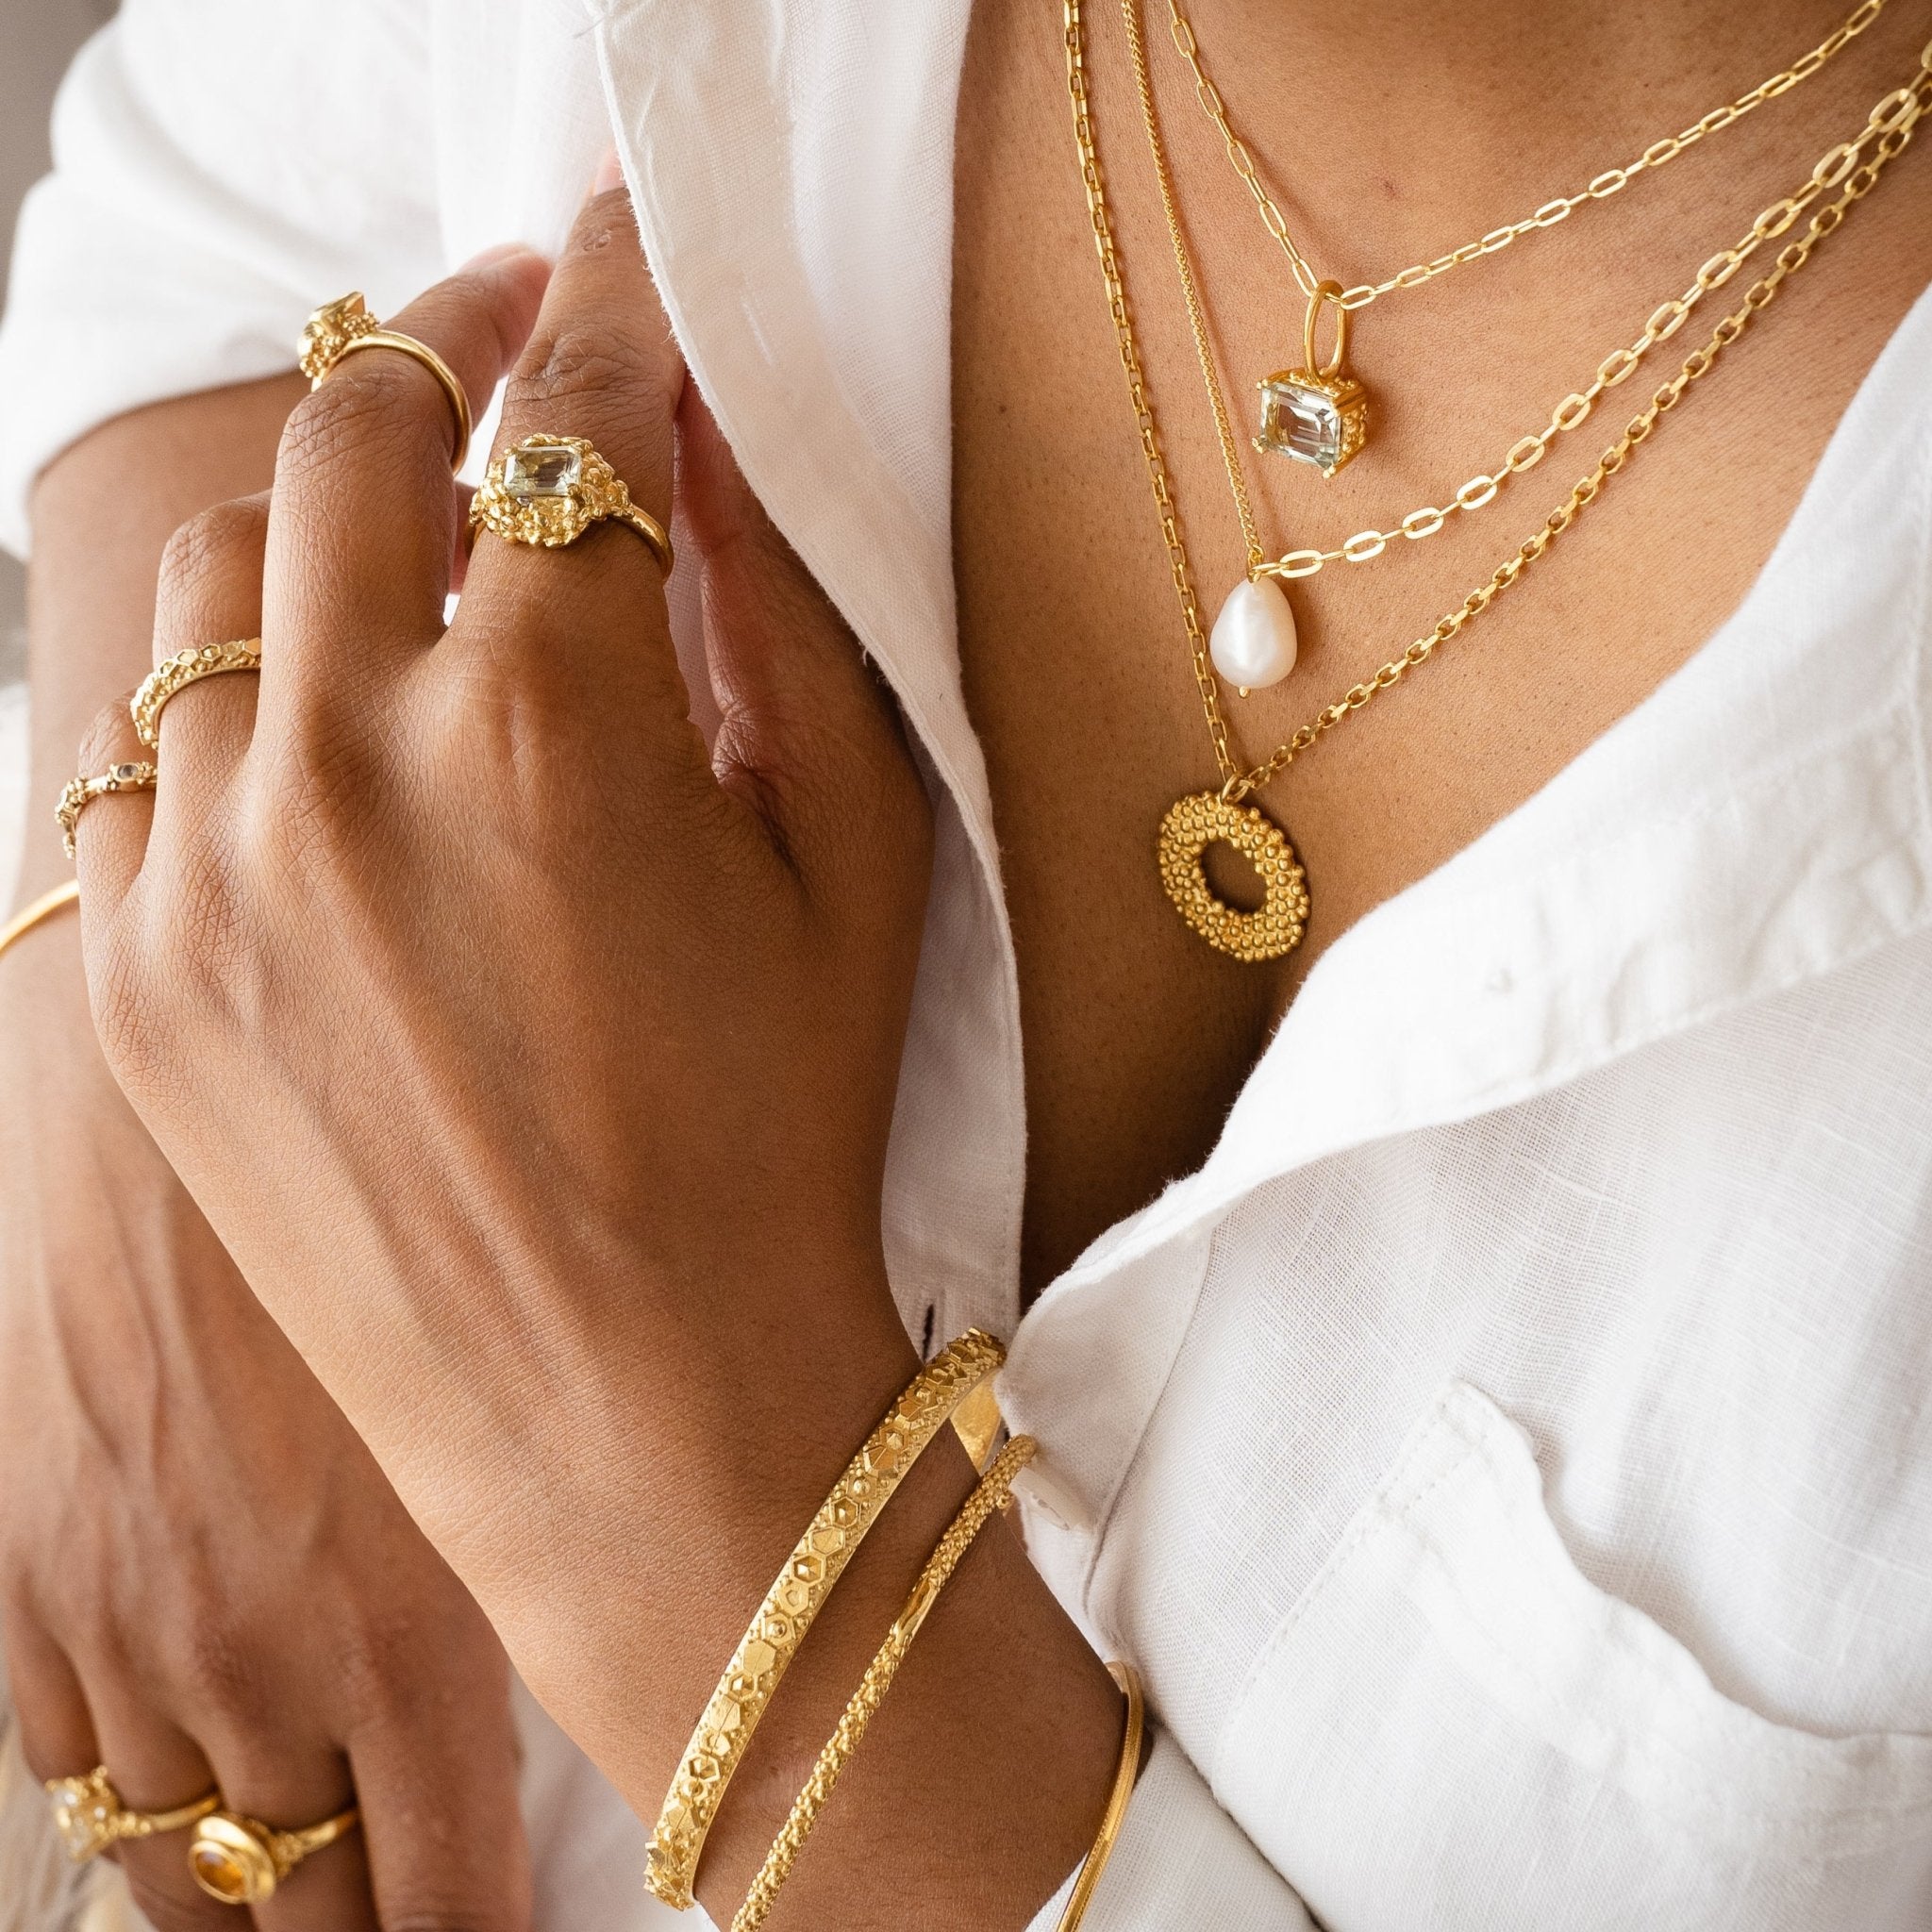 Golden Hues: Jewellery Inspiration for Autumn - Dainty London